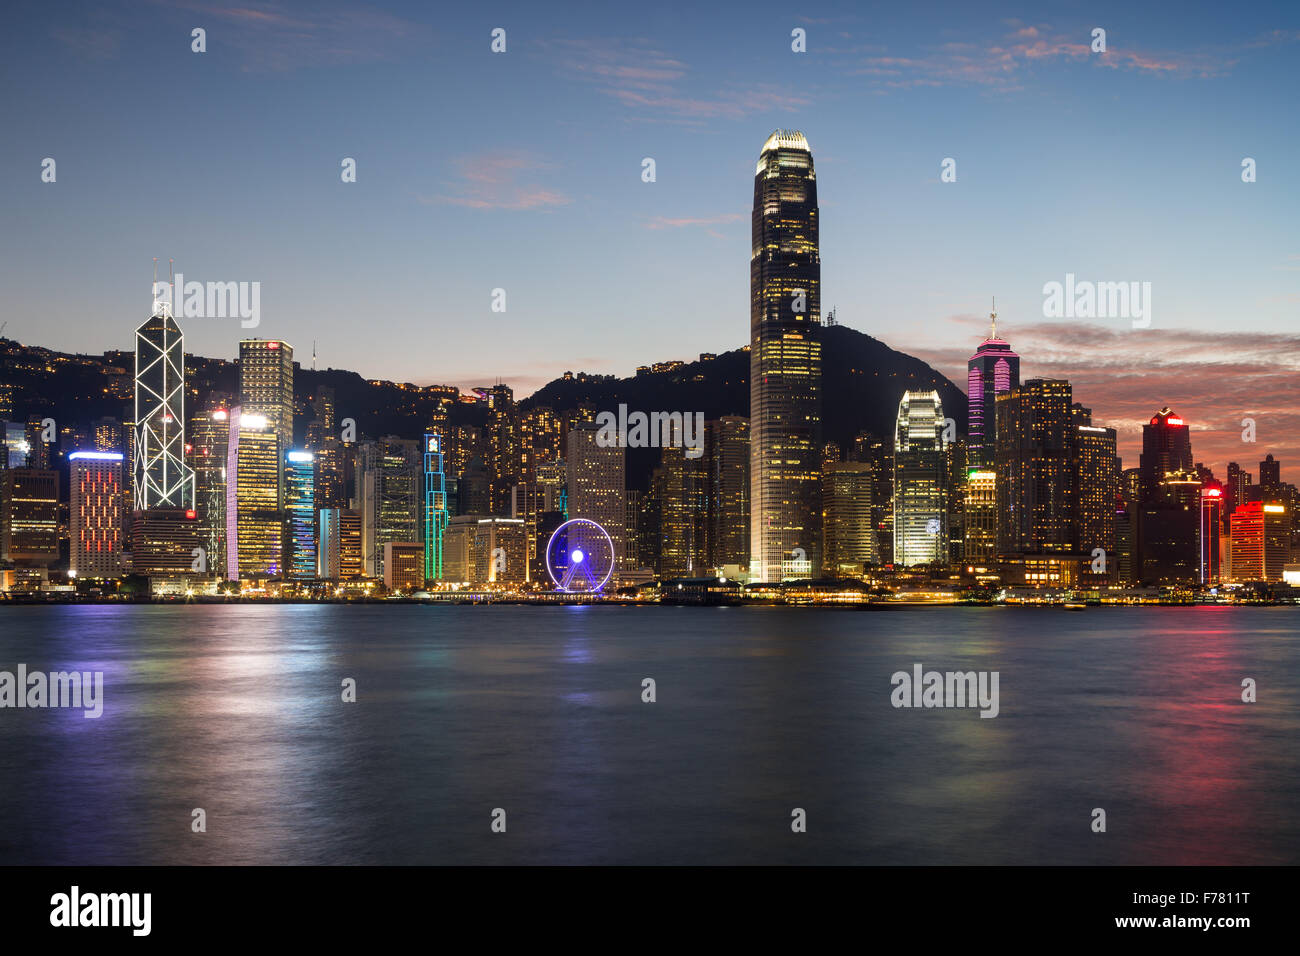 Scenic view of Hong Kong Island's skyline at evening over Victoria Harbor with lit urban skyscrapers in Hong Kong, China. Stock Photo